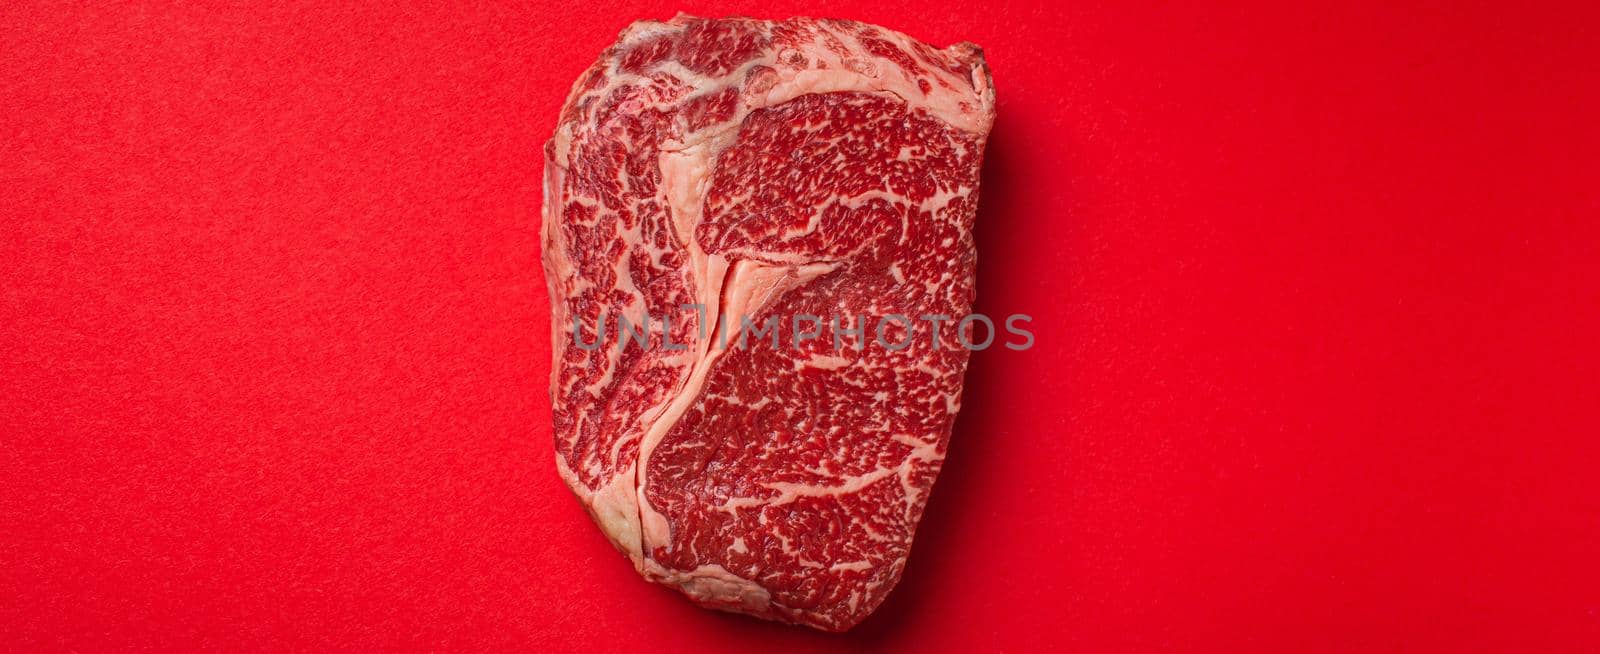 Raw meat beef prime cut steak Ribeye on clean red background from above, beefsteak concept banner minimalism by its_al_dente